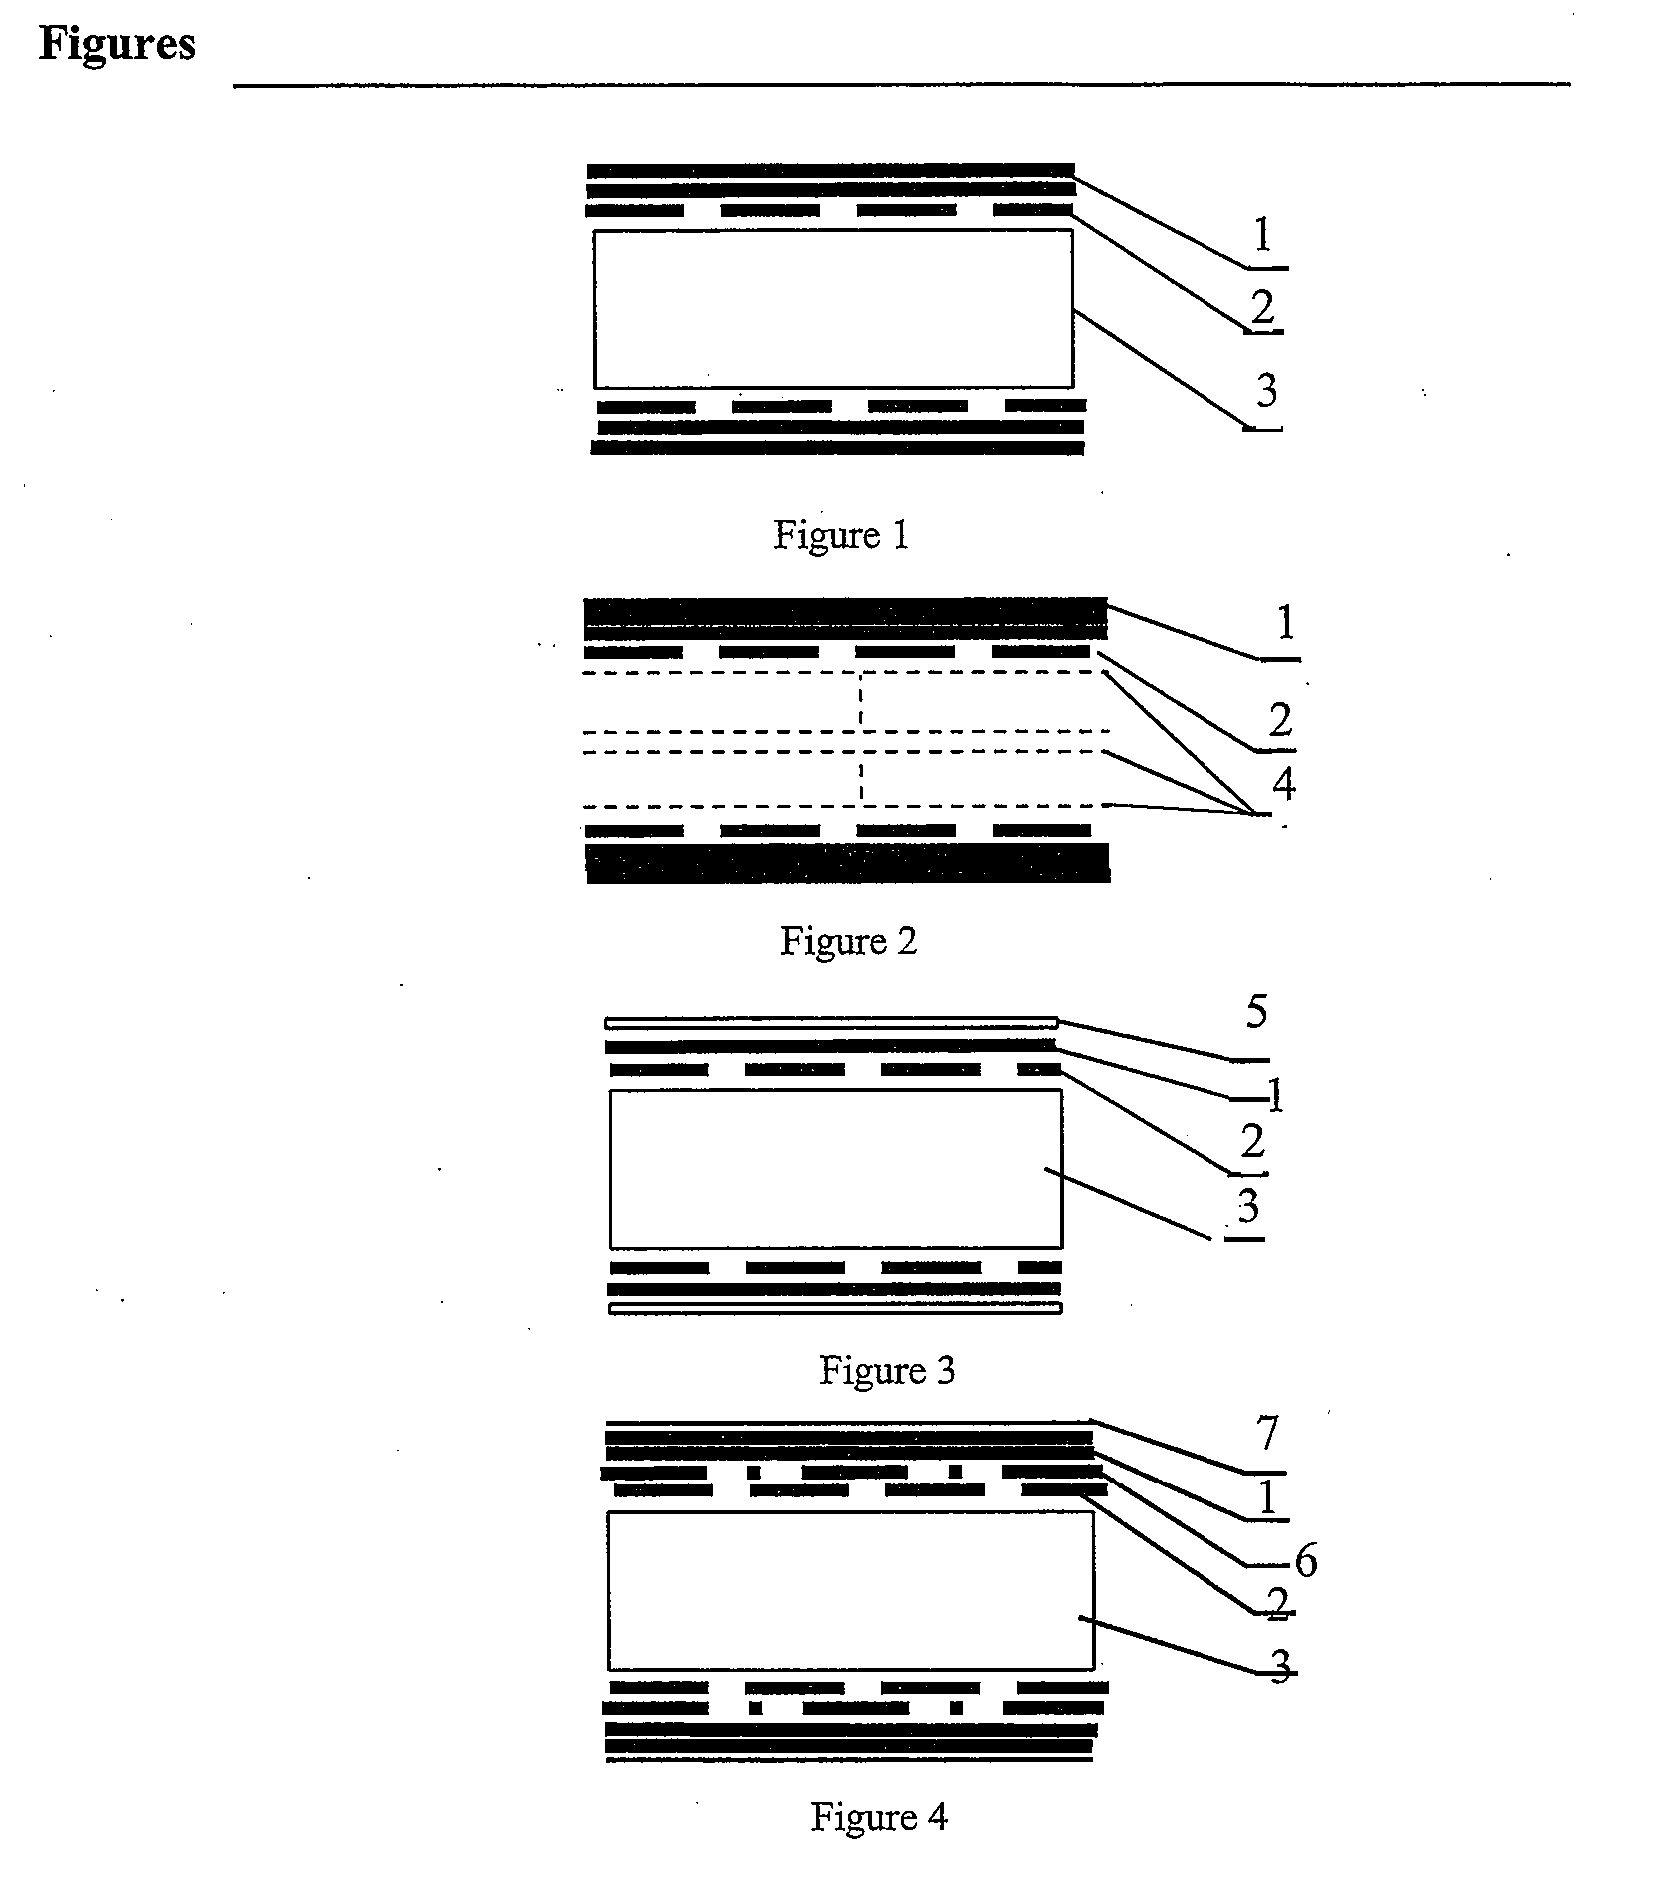 Reinforced composite container flooring with resin-impregnated veneers and method of manufacture